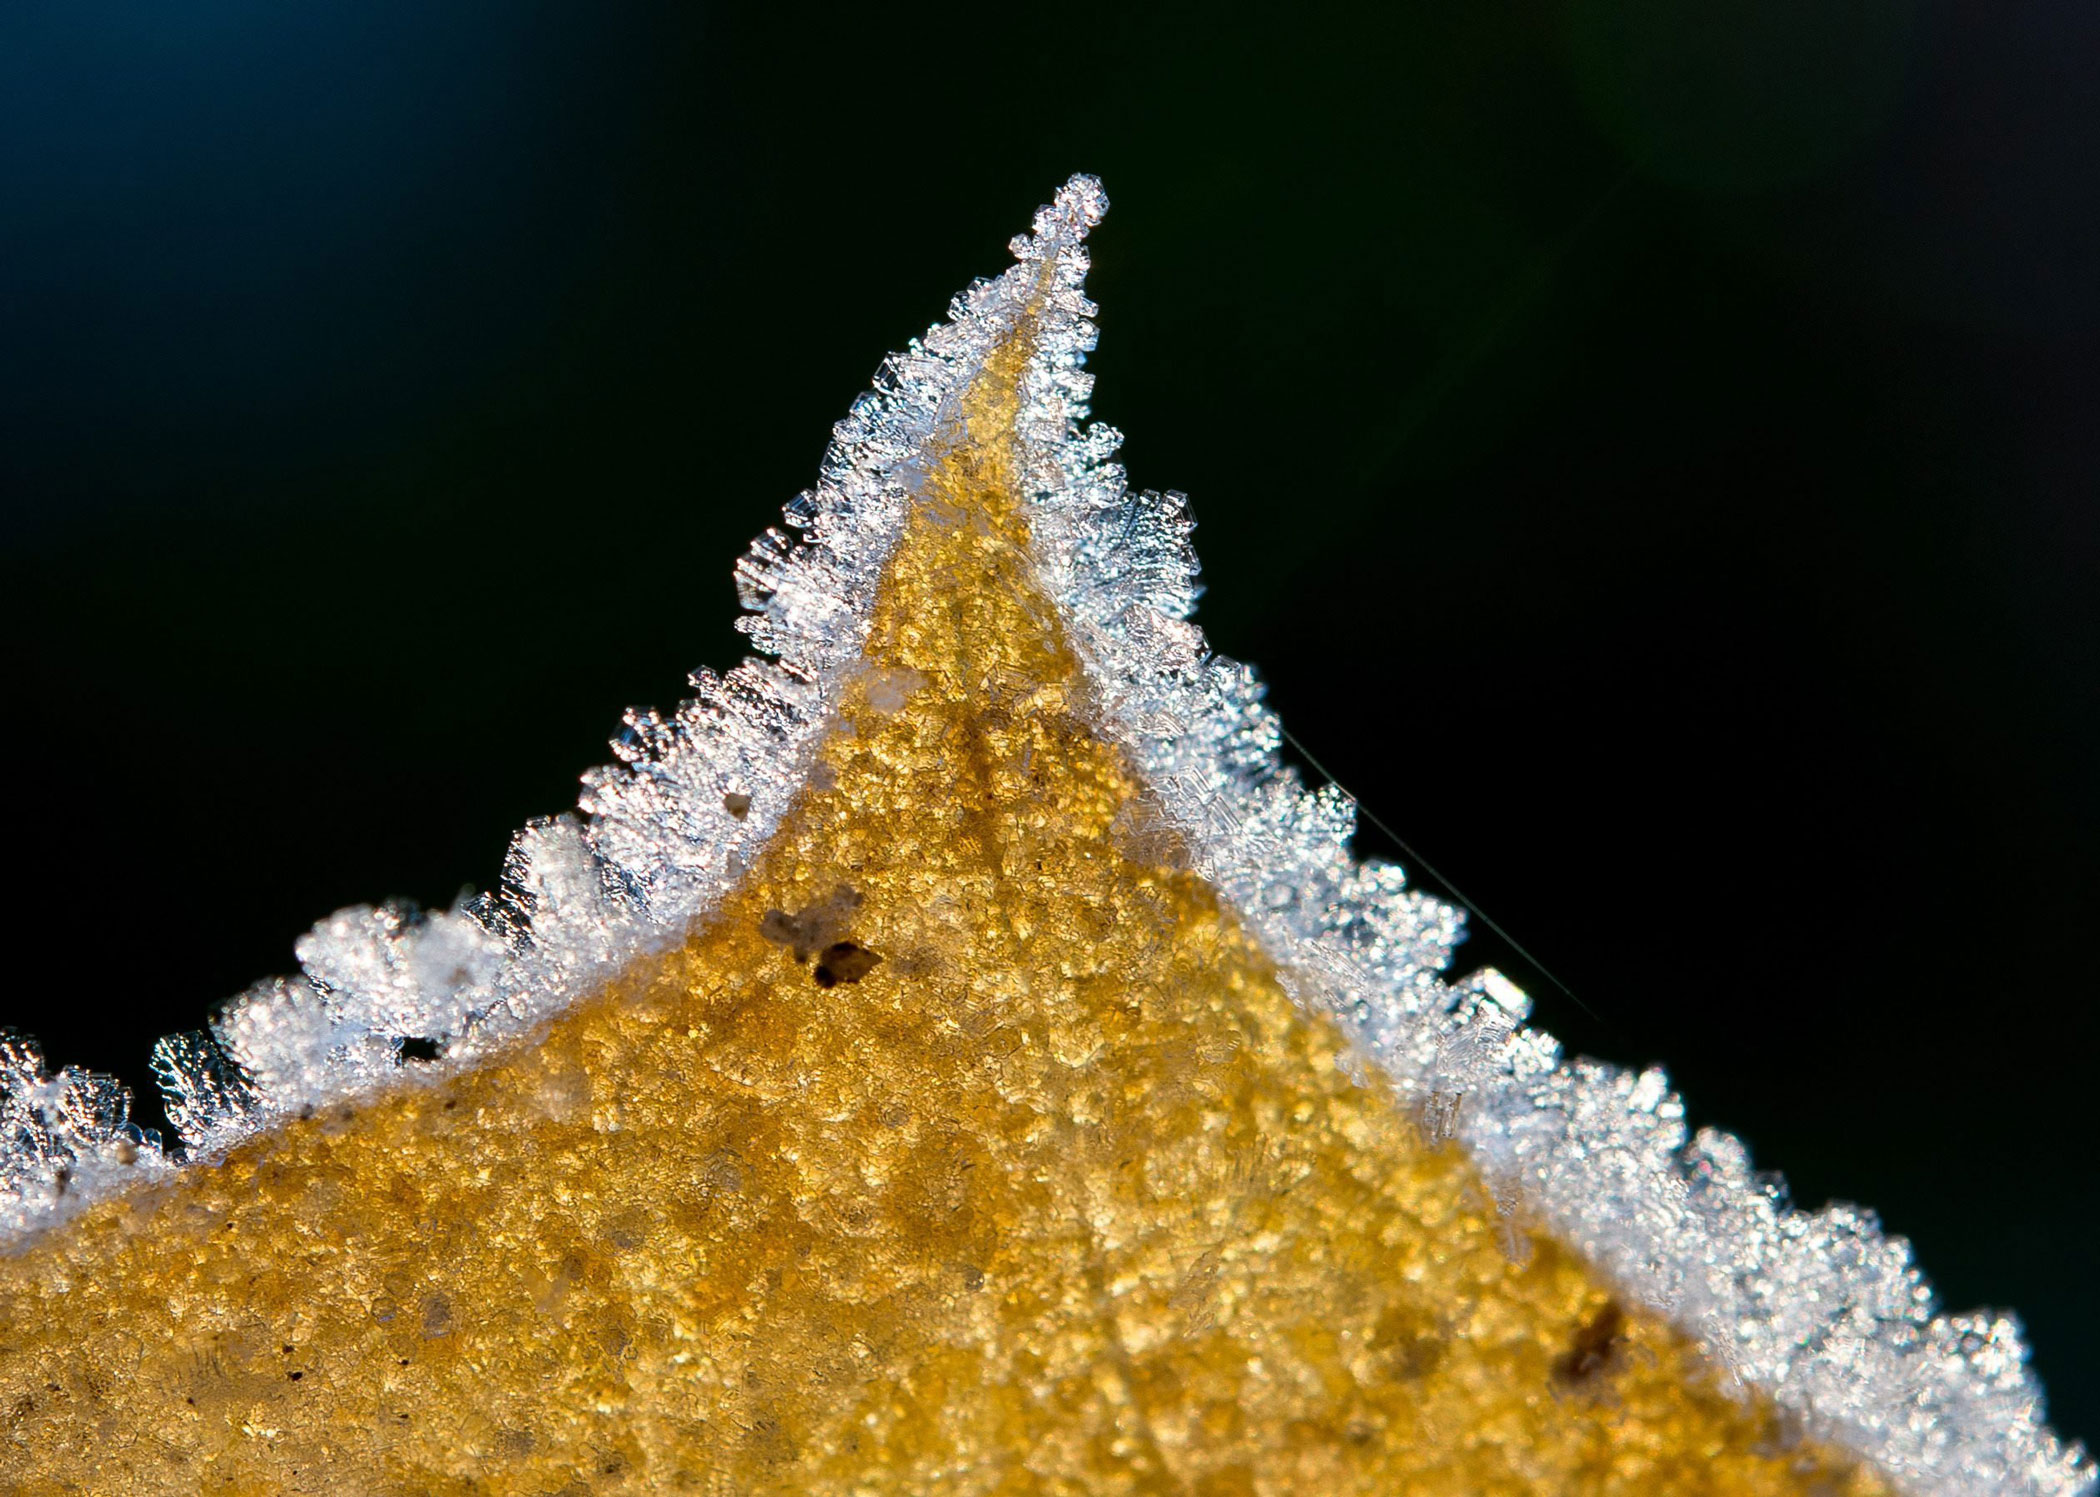 Ice crystals grow on the edge of an autumn colored maple leaf in Sieversdorf, Germany on Nov 3, 2015.